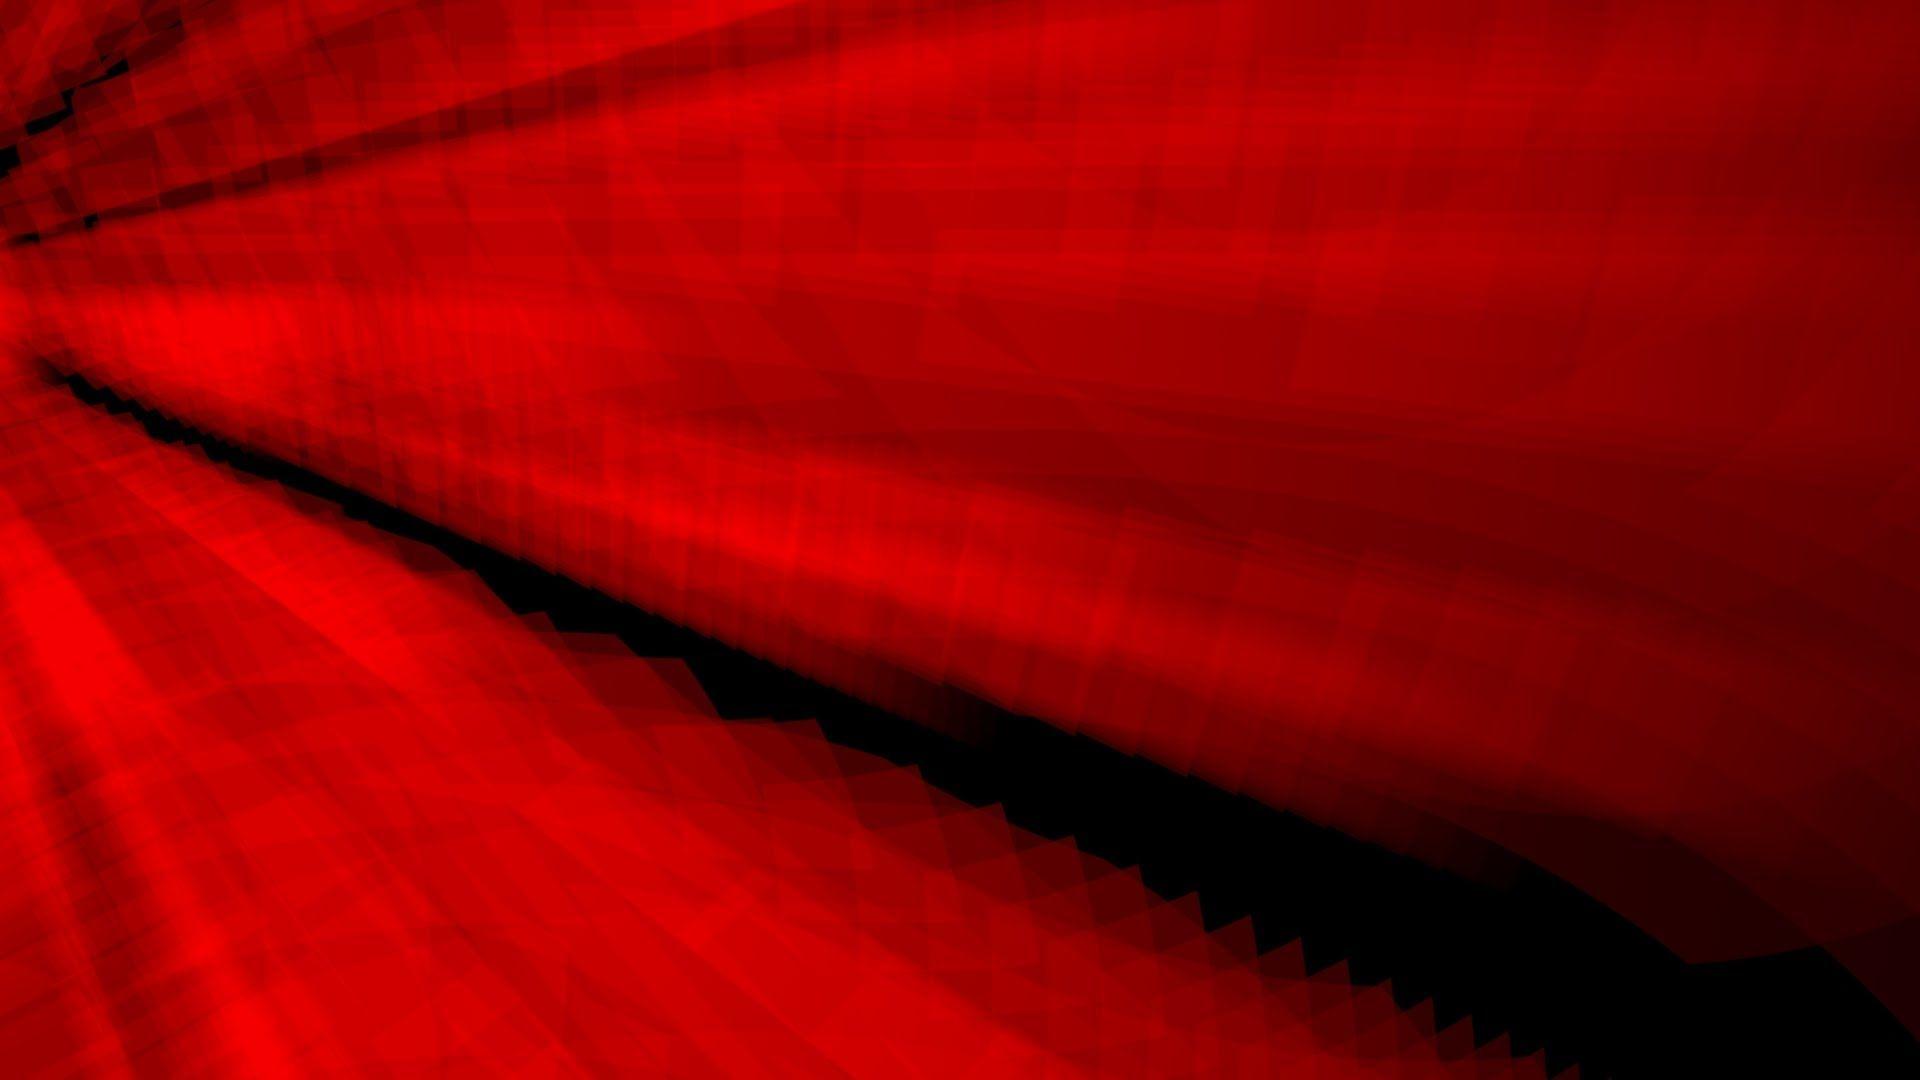 Evil red party chaos lights animated background